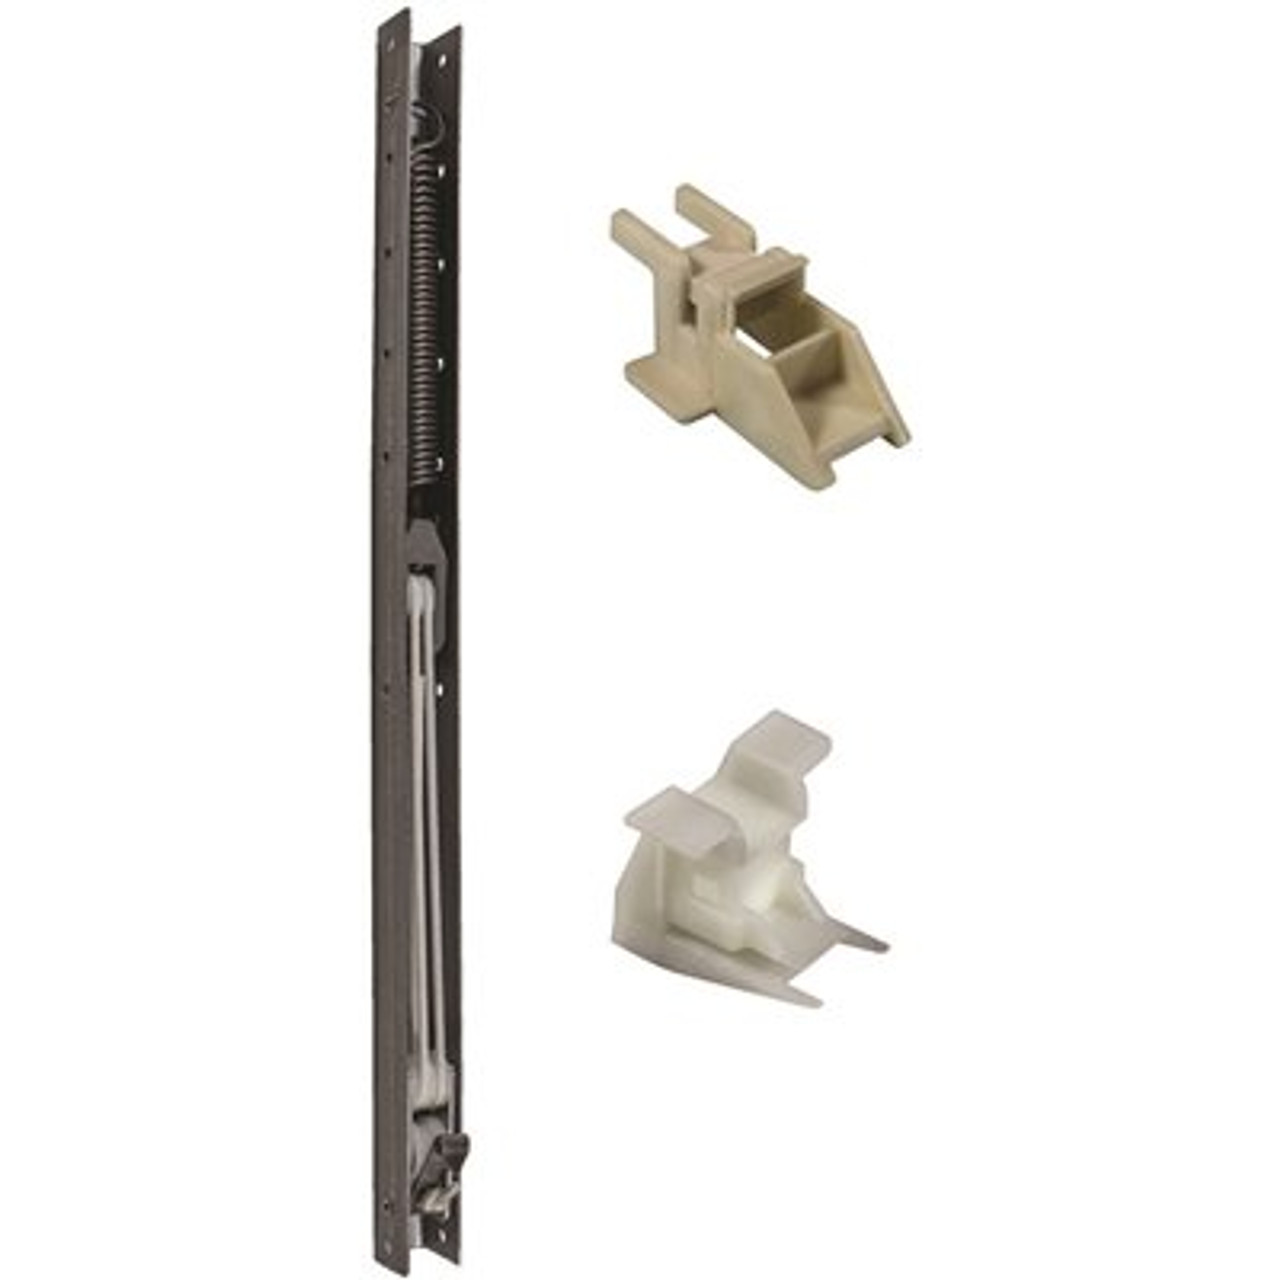 30 In. L Window Channel Balance 2930 With 9/16 In. W X 5/8 In. D Top And Bottom End Brackets Attached - 314413360